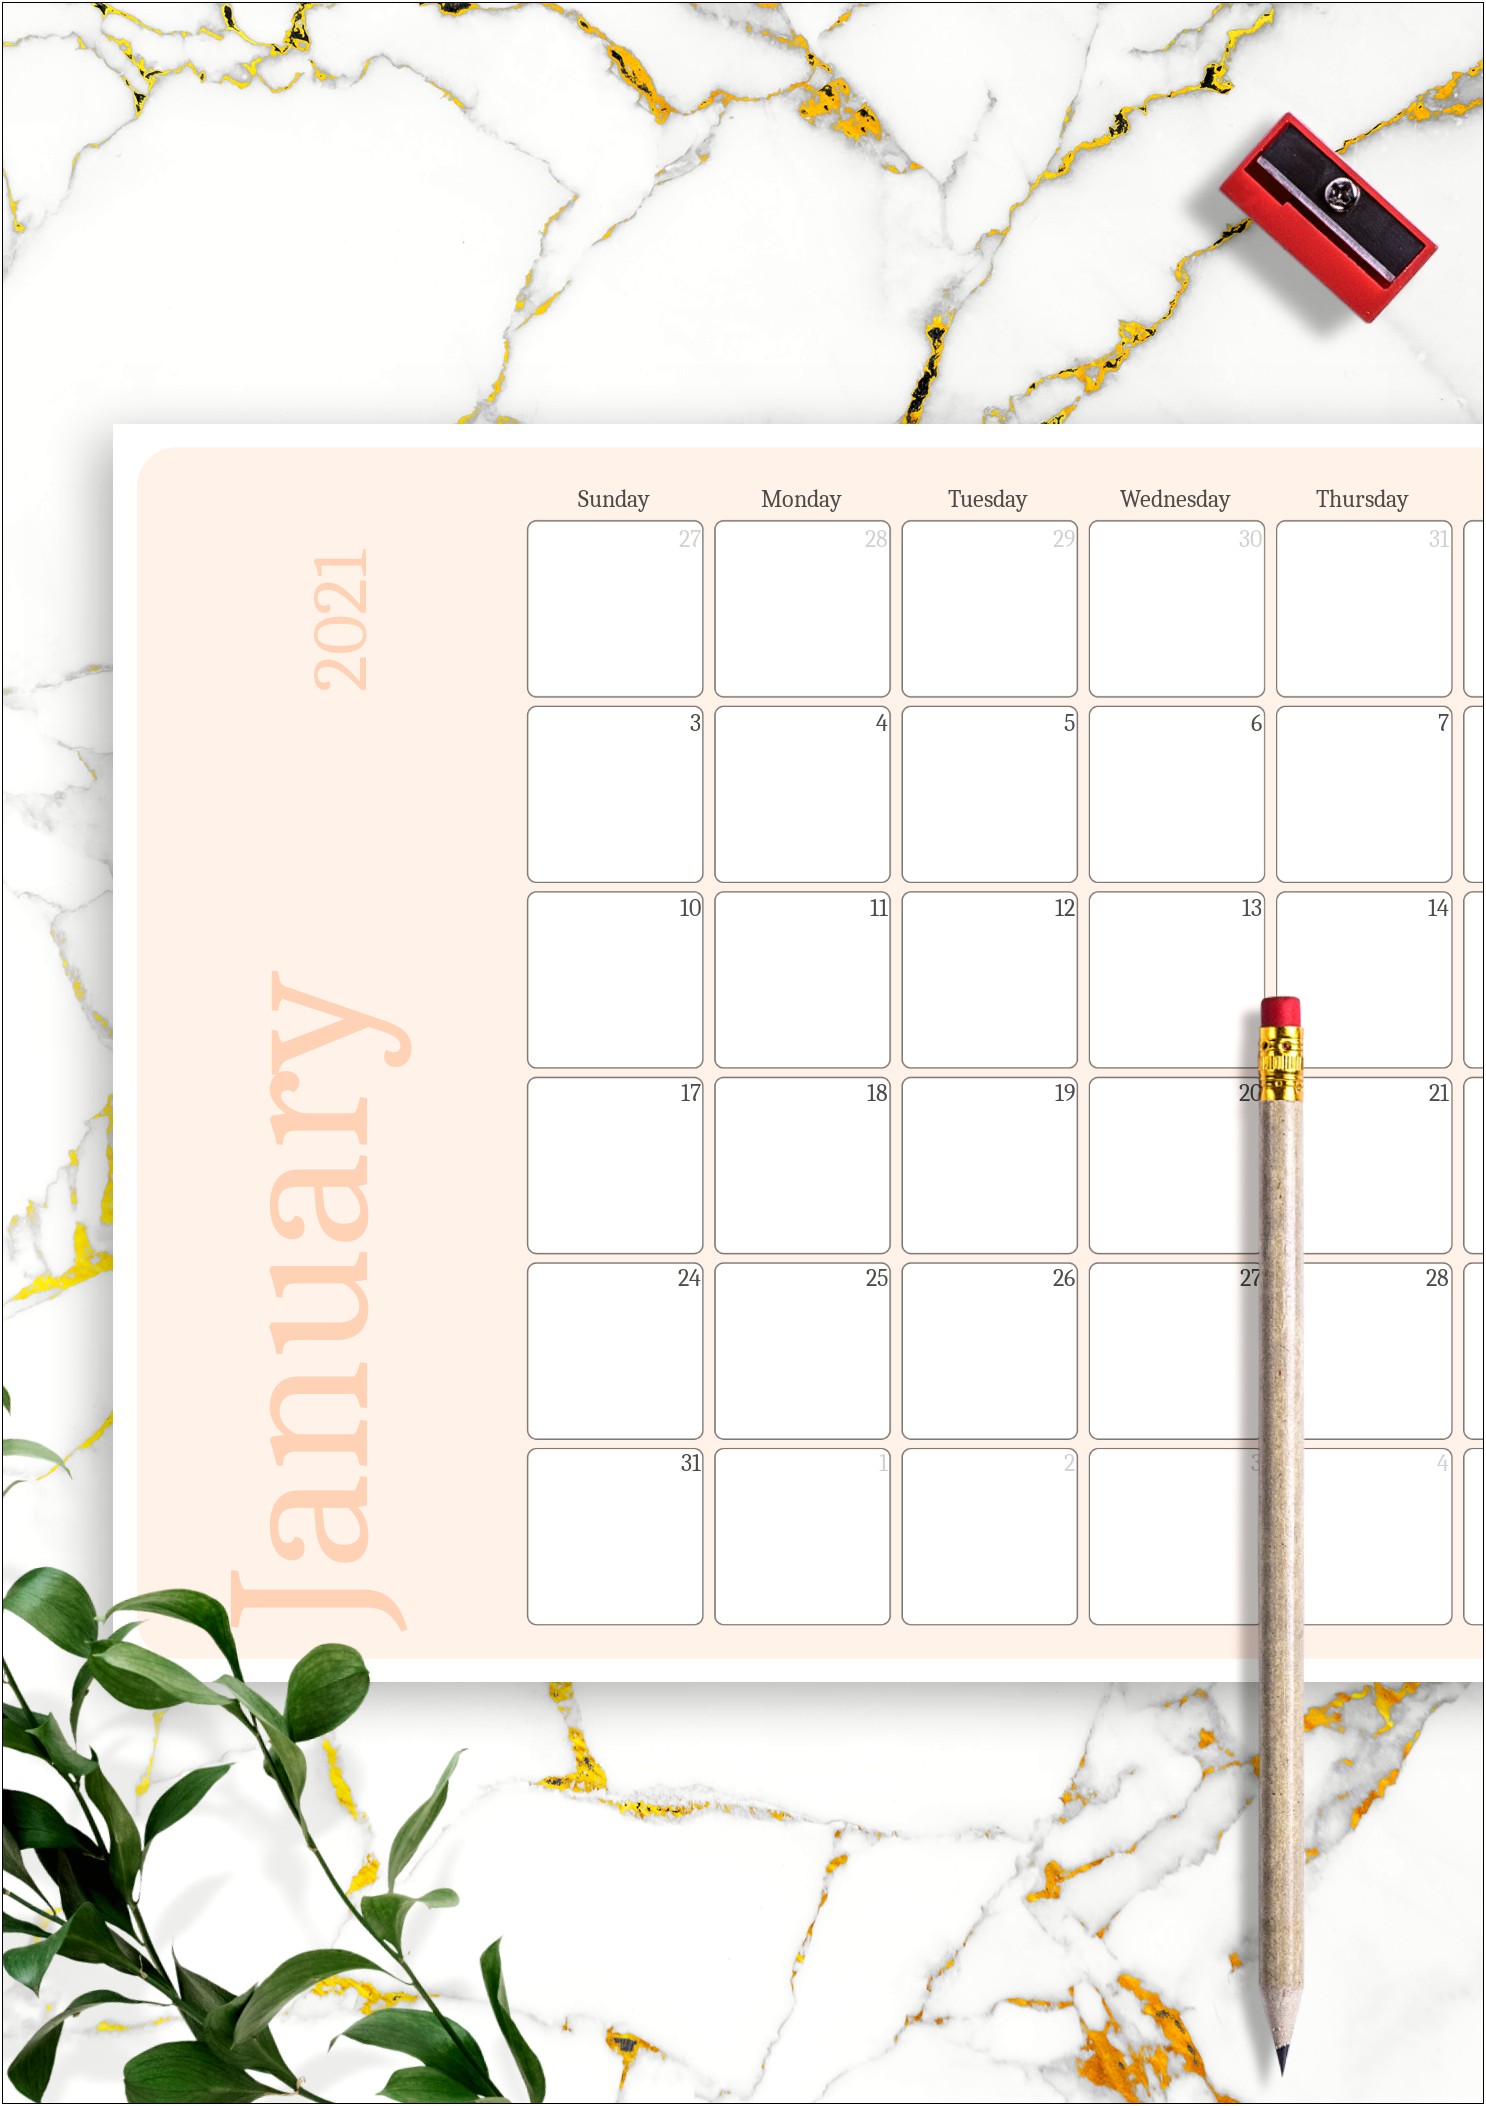 Monthly Schedule Calendar Free Download Template